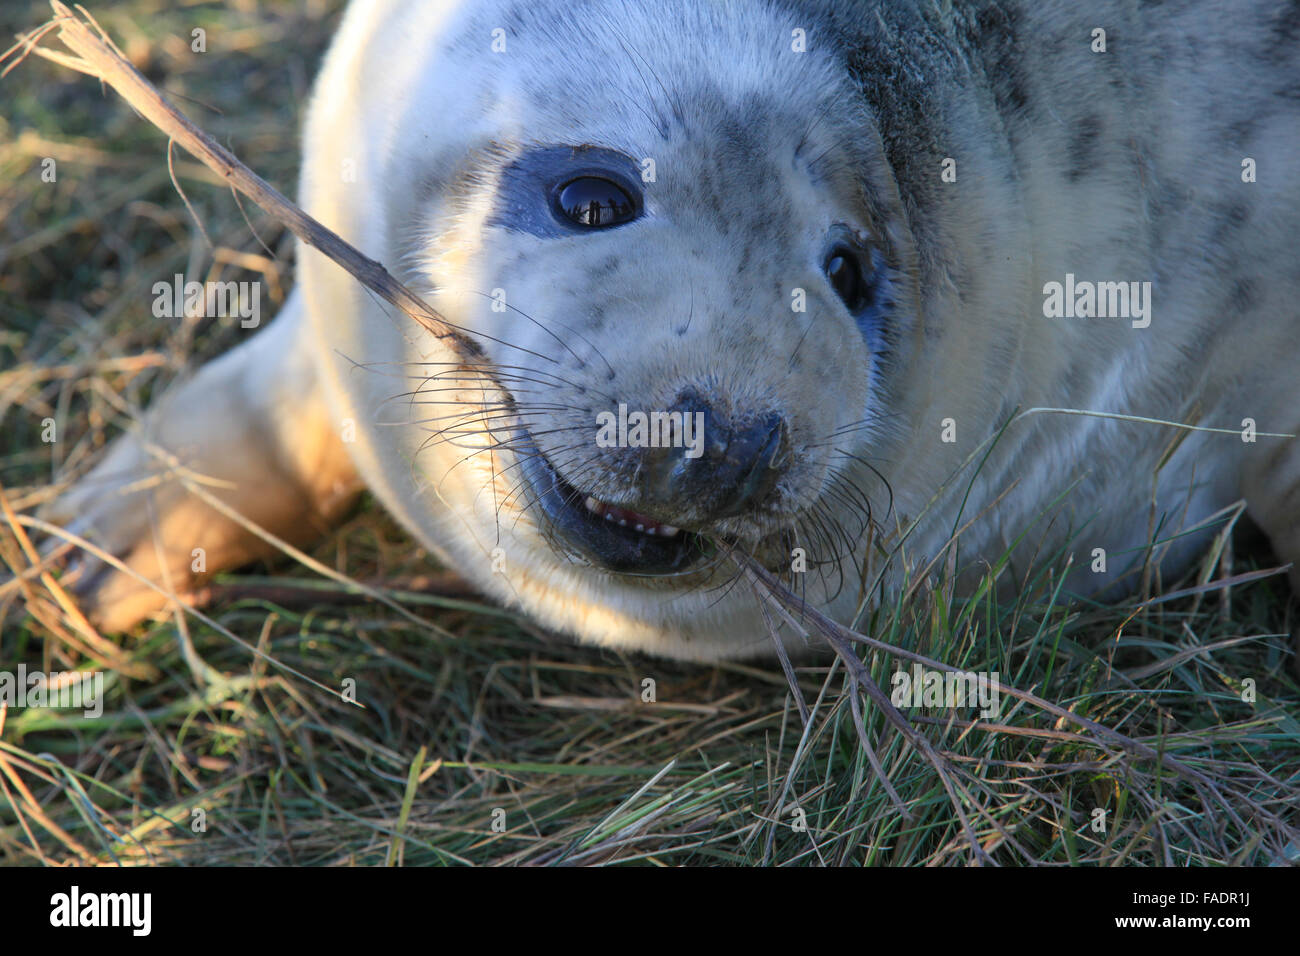 Donna Nook, Grey seals, international, conservation, grey seal colony, low-lying coast, North-Lincolnshire, England, bombing range, RAF Donna Nook. Stock Photo